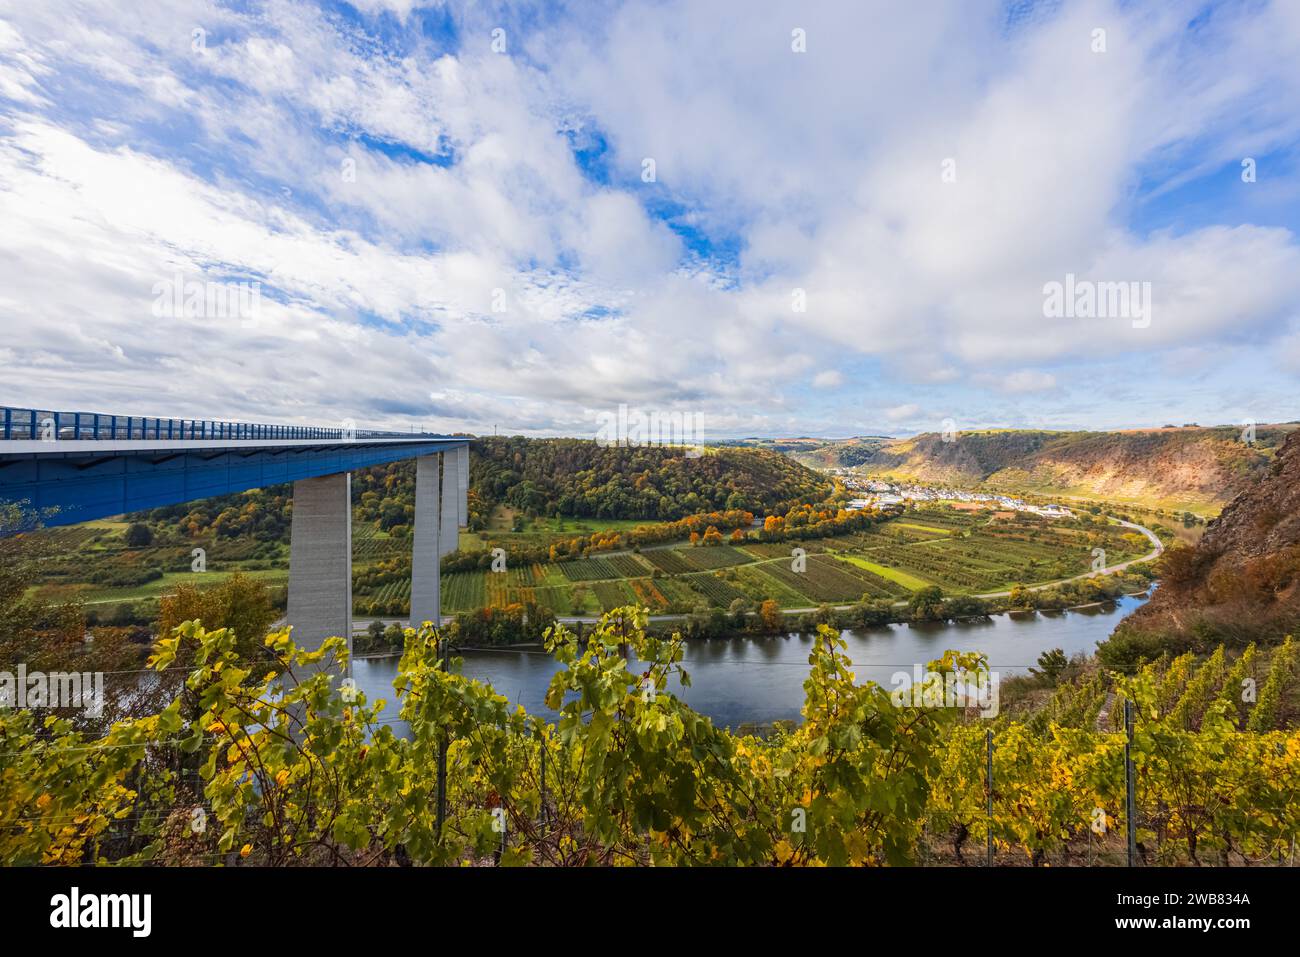 The Moselle Viaduct (German: Moseltalbrücke) carries the Bundesautobahn 61 over a meander of the river Moselle, connecting the Hunsrück and Eifel moun Stock Photo